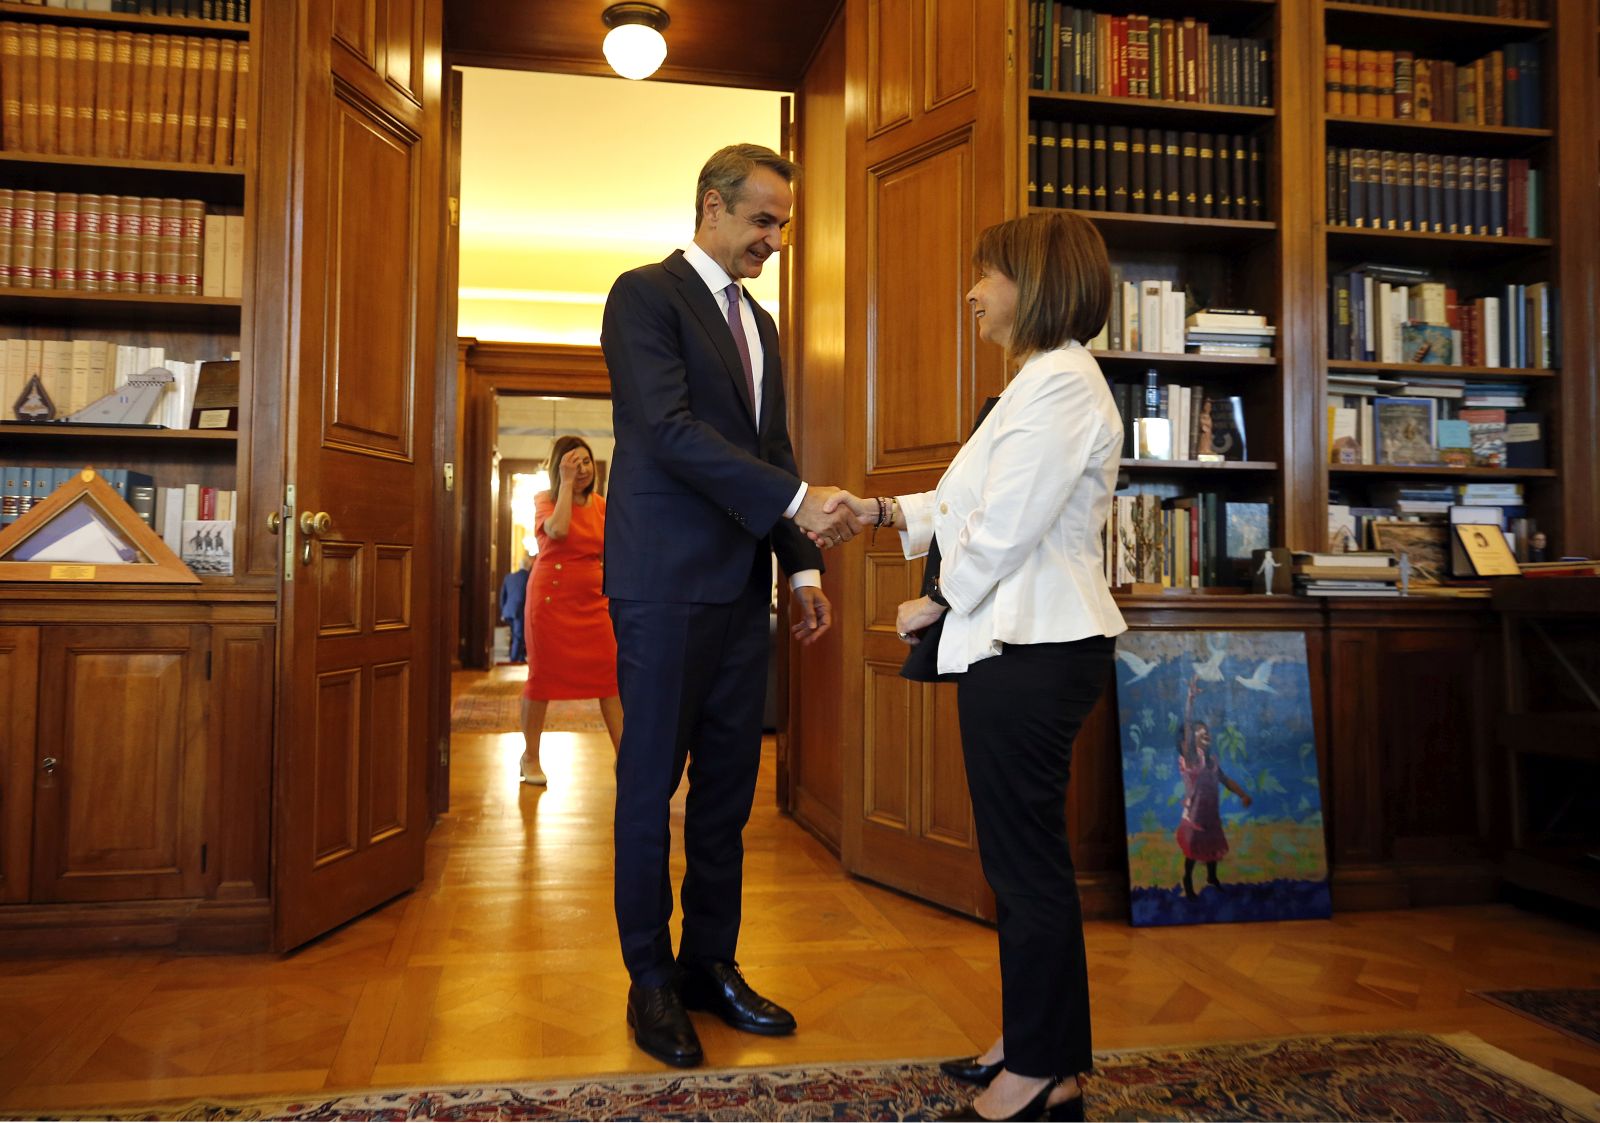 epa10711736 Greek President Katerina Sakellaropoulou (R) welcomes New Democracy leader Kyriakos Mitsotakis (L), during a meeting at the Presidential Mansion, in Athens, Greece, 26 June 2023. Kyriakos Mitsotakis will receive a mandate to form a government following his electoral victory at 25 June's runoff elections.  EPA/ALEXANDROS VLACHOS